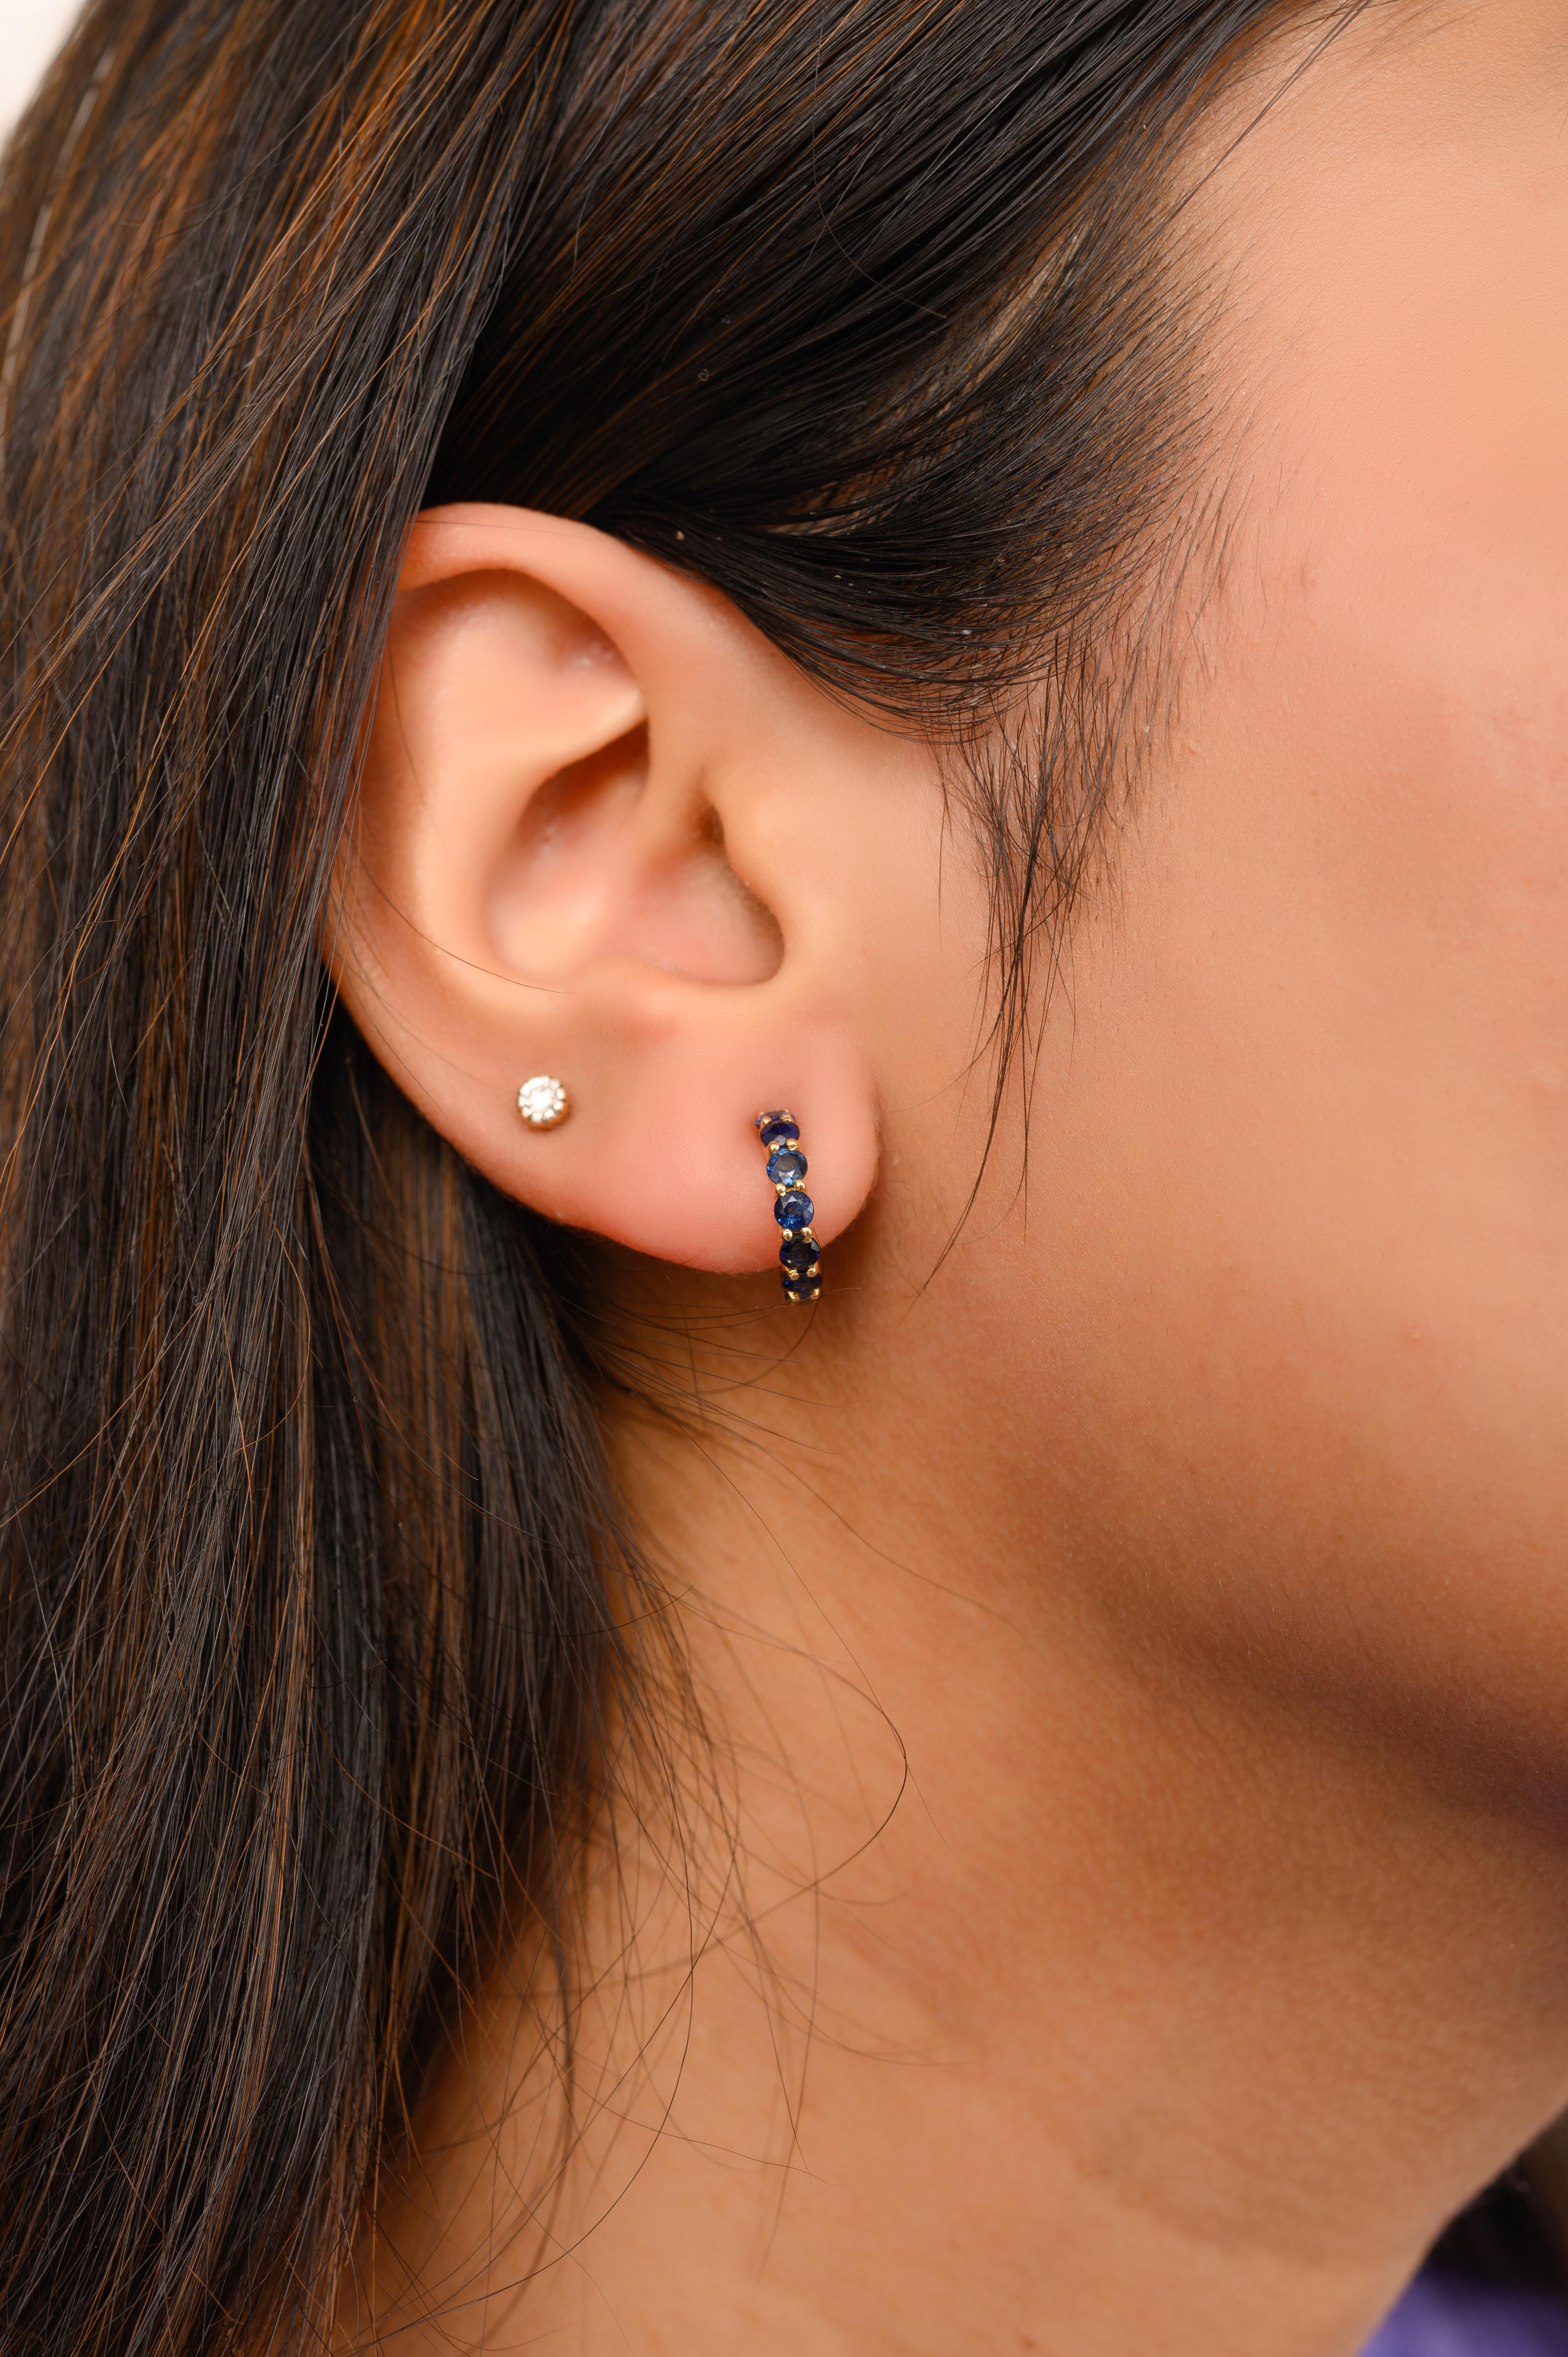 Handcrafted Dainty Blue Sapphire Huggie Hoop Earrings in 18K Gold to make a statement with your look. You shall need hoop earrings to make a statement with your look. These earrings create a sparkling, luxurious look featuring round cut